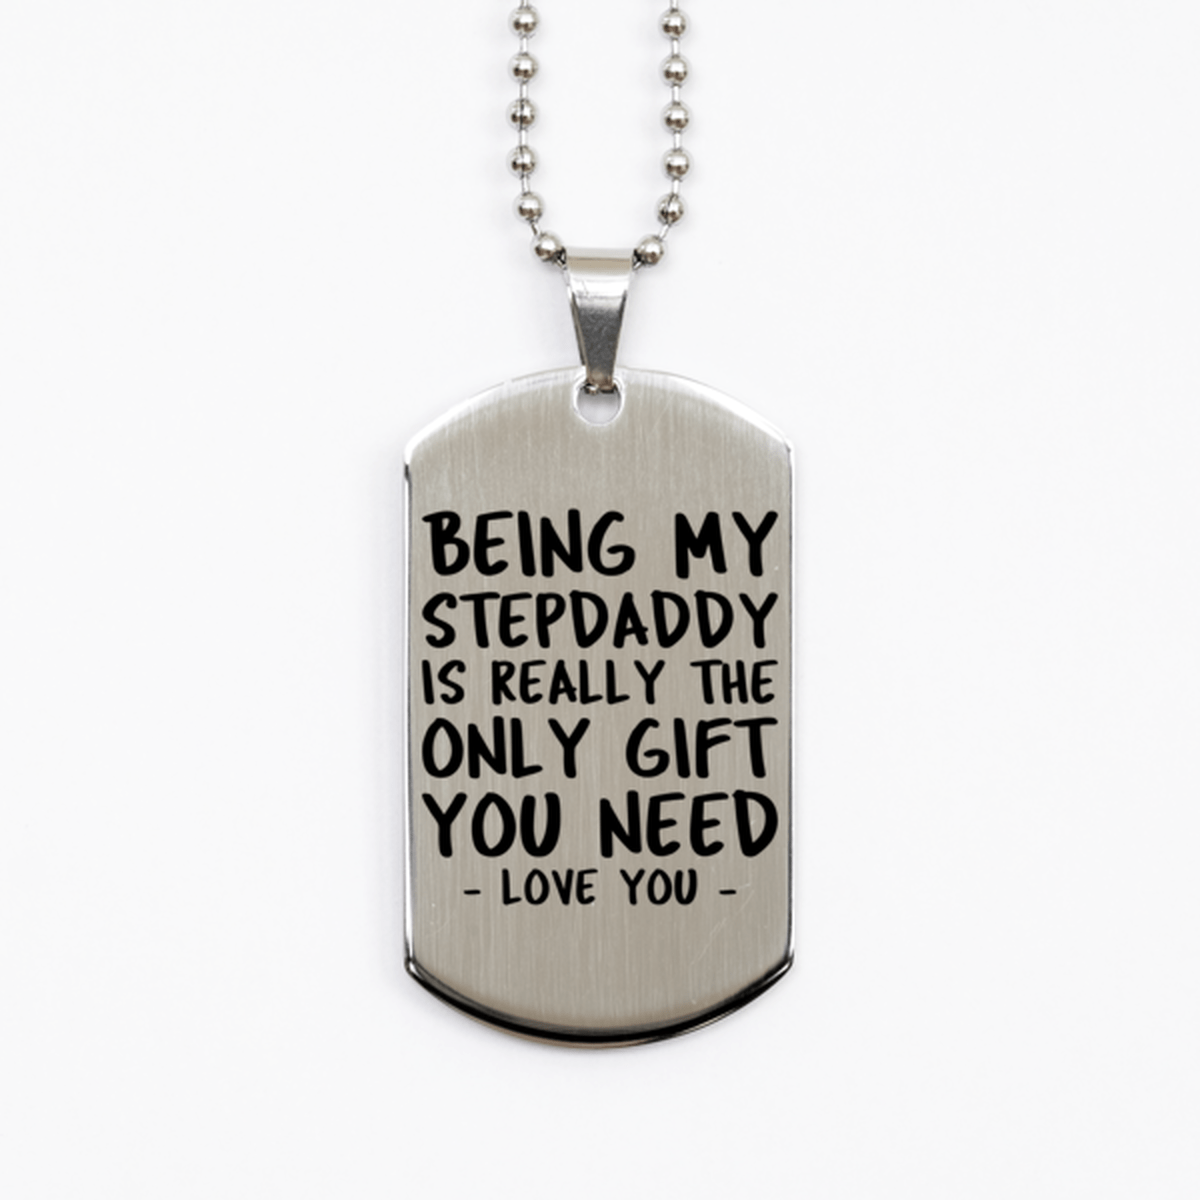 Funny Stepdaddy Silver Dog Tag Necklace, Being My Stepdaddy Is Really the Only Gift You Need, Best Birthday Gifts for Stepdaddy